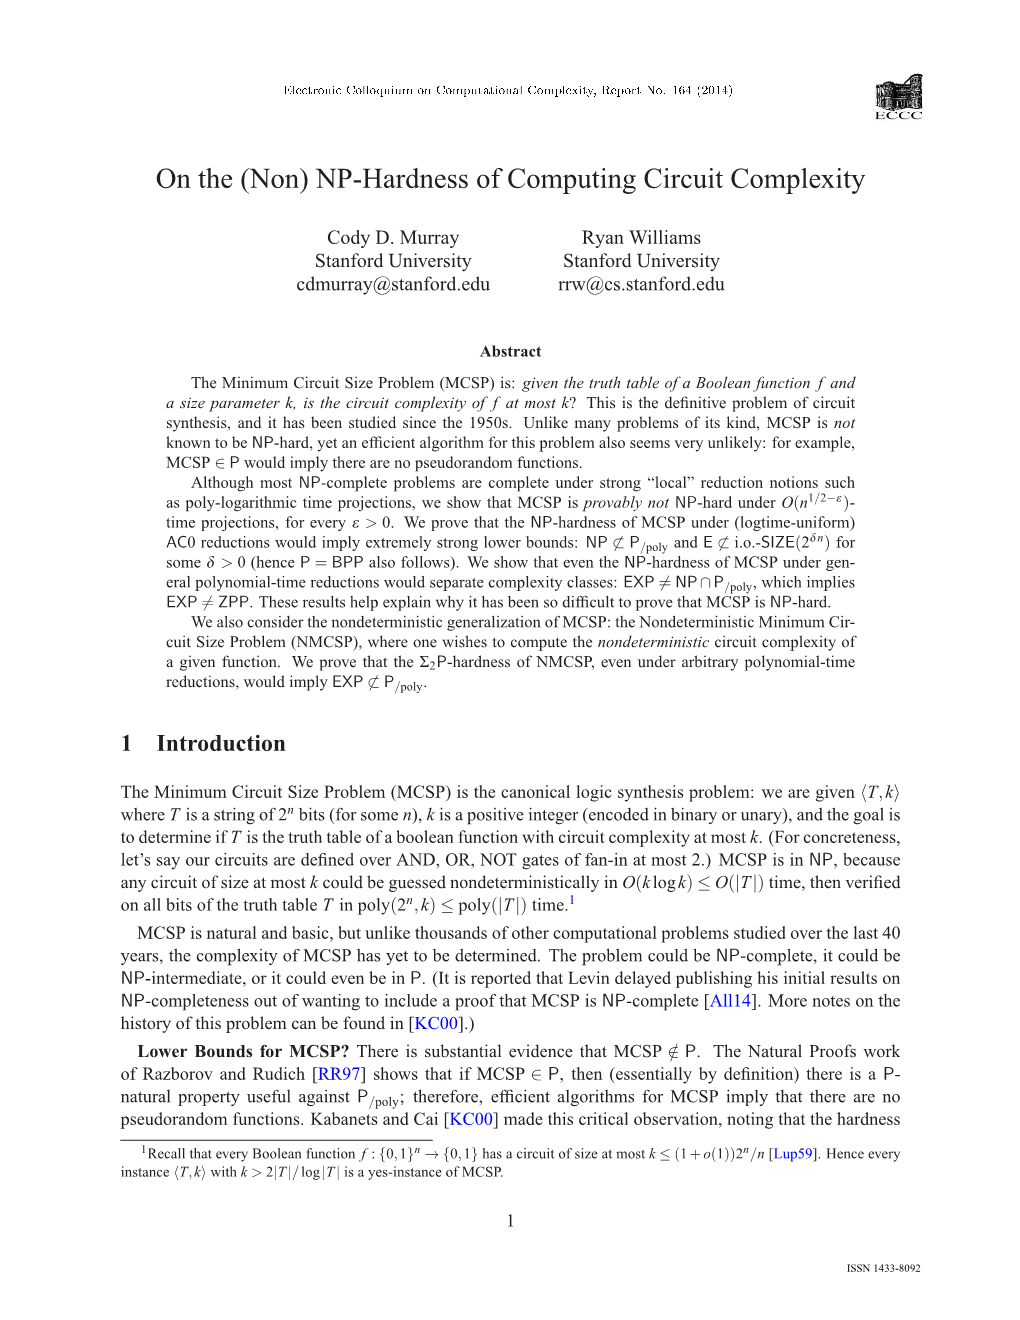 NP-Hardness of Computing Circuit Complexity